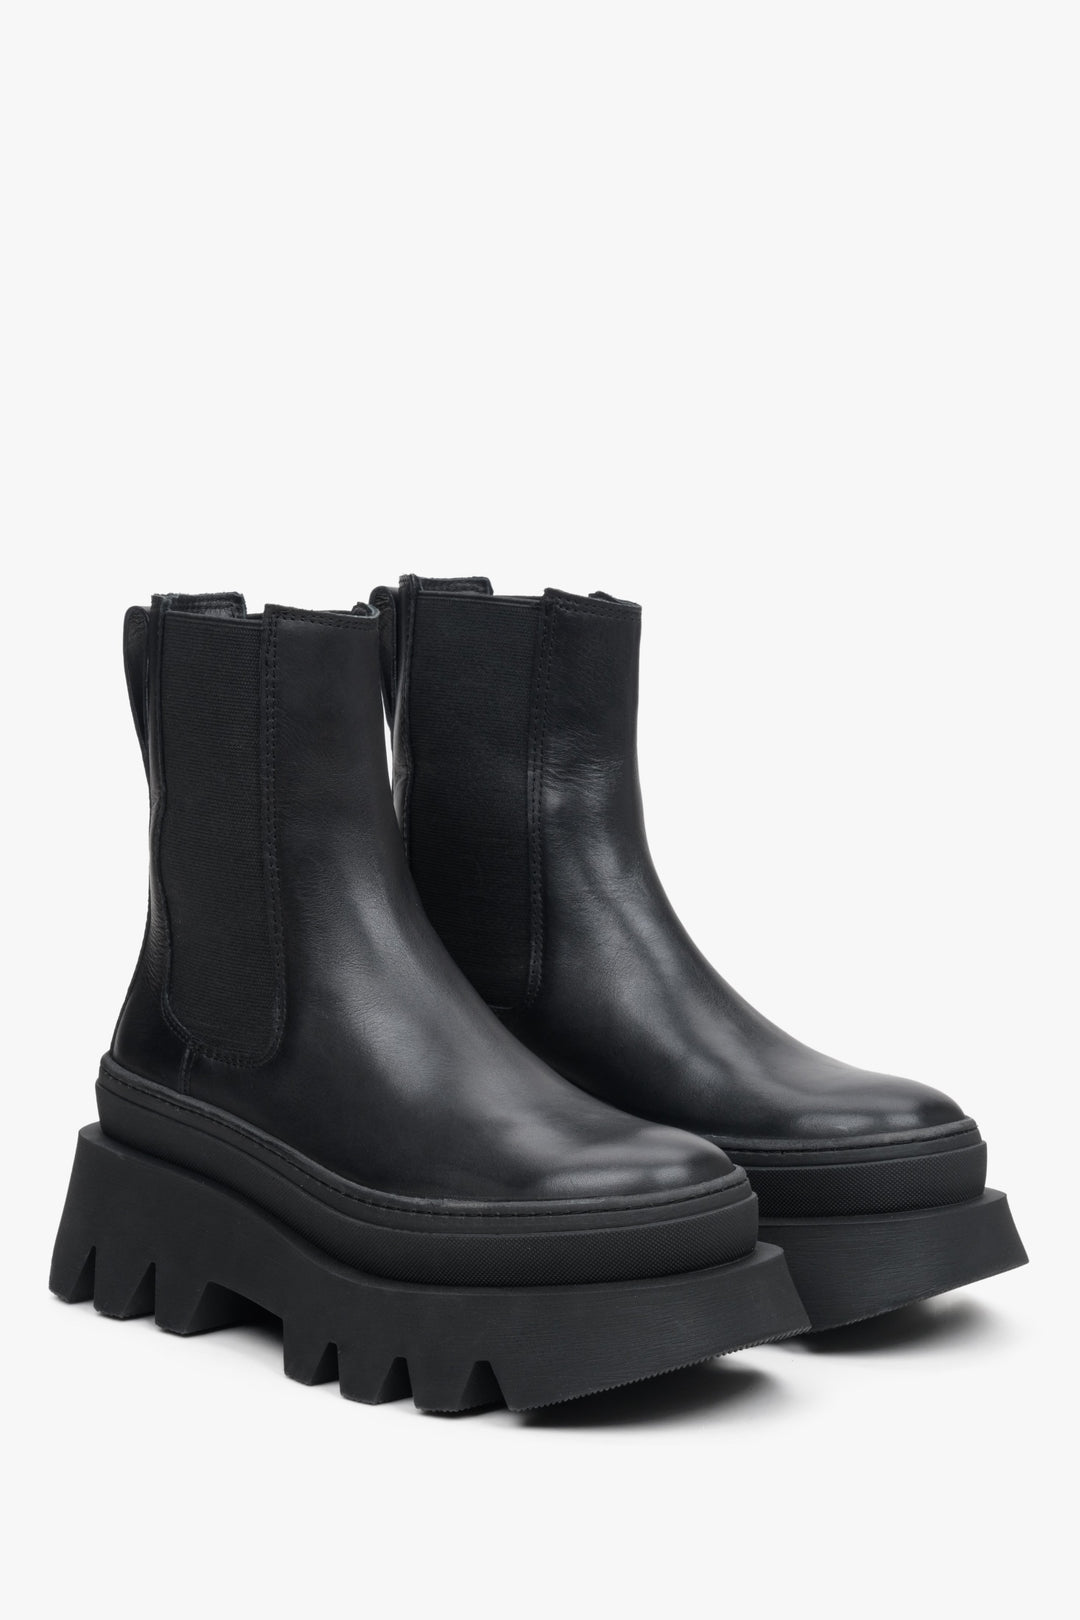 Women's black leather chelsea boots on a platform by Estro - close-up on the toe and side seam of the shoes.